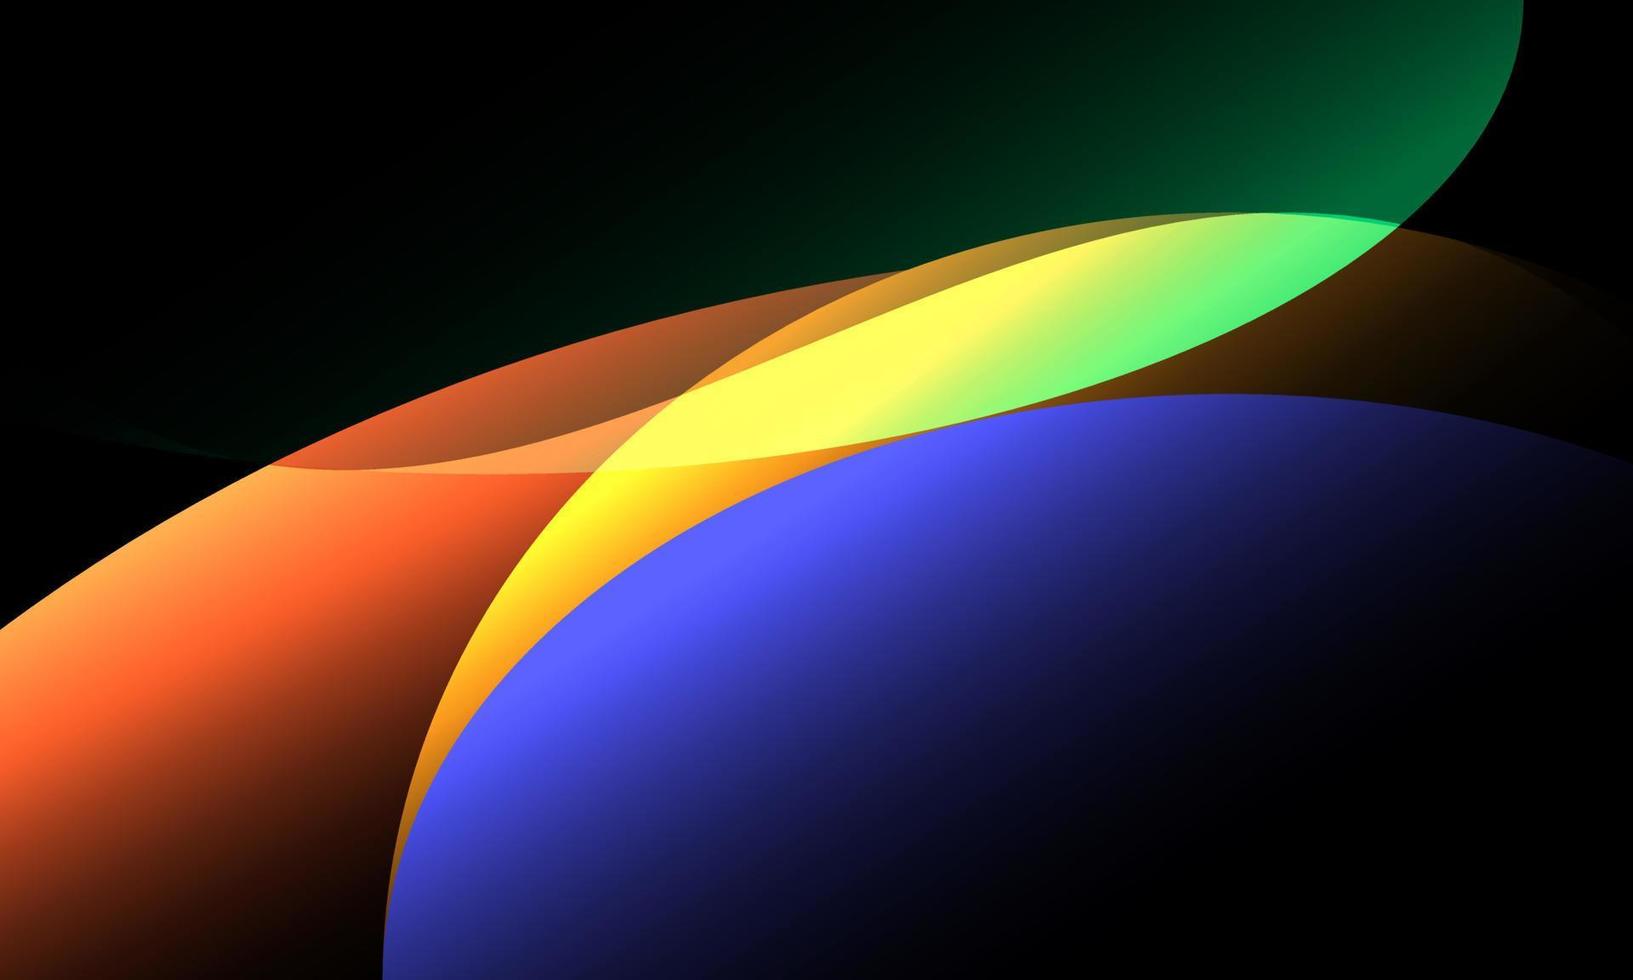 Abstract colorful geometric curve shapes on black background. vector